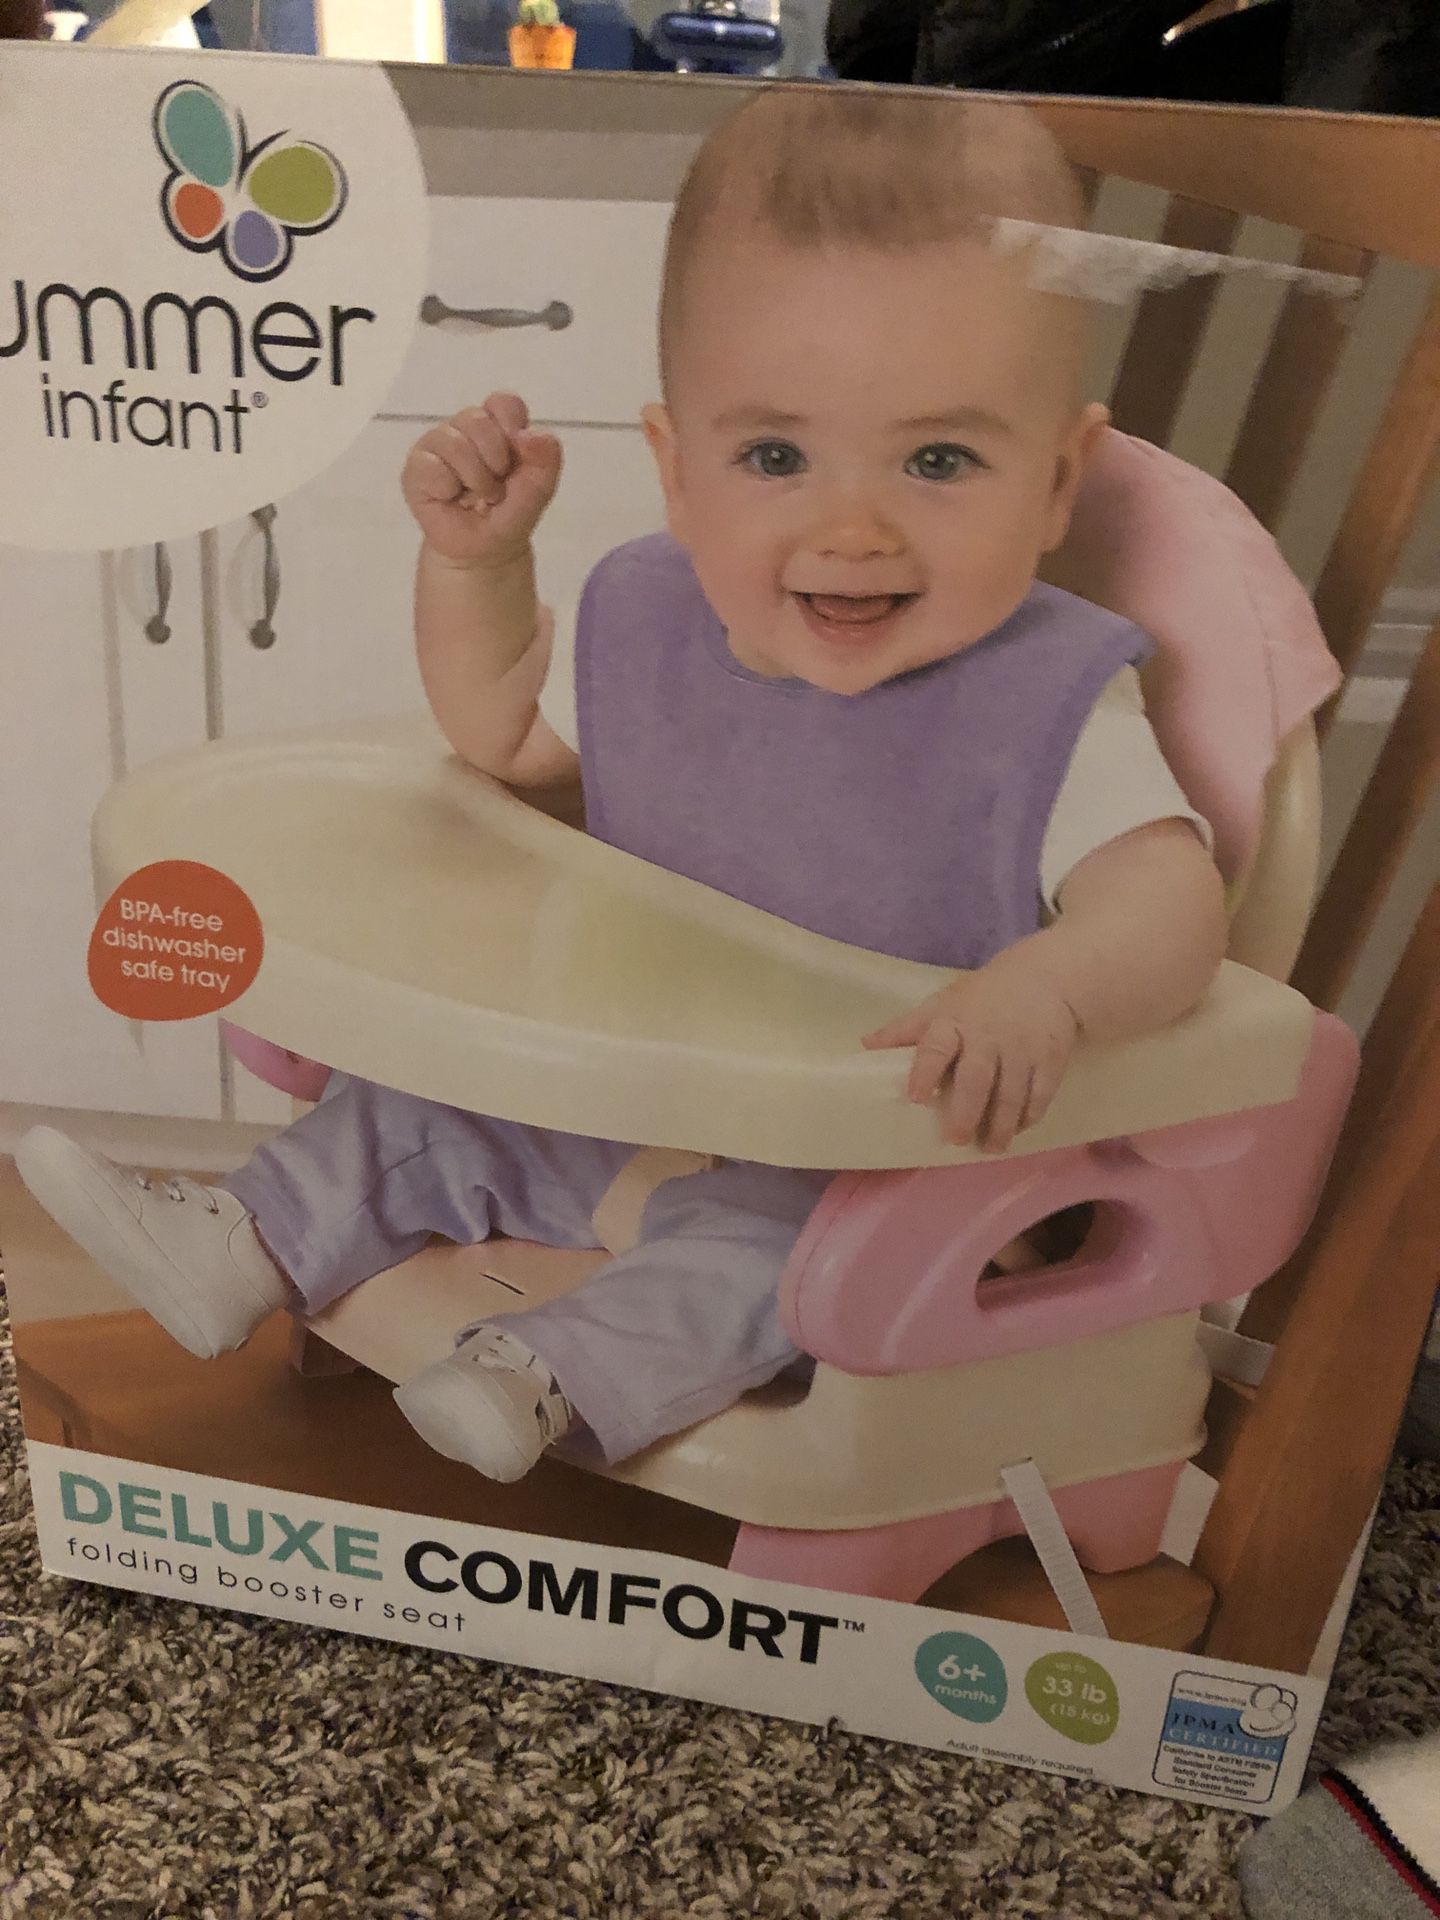 Baby booster seat for FREE